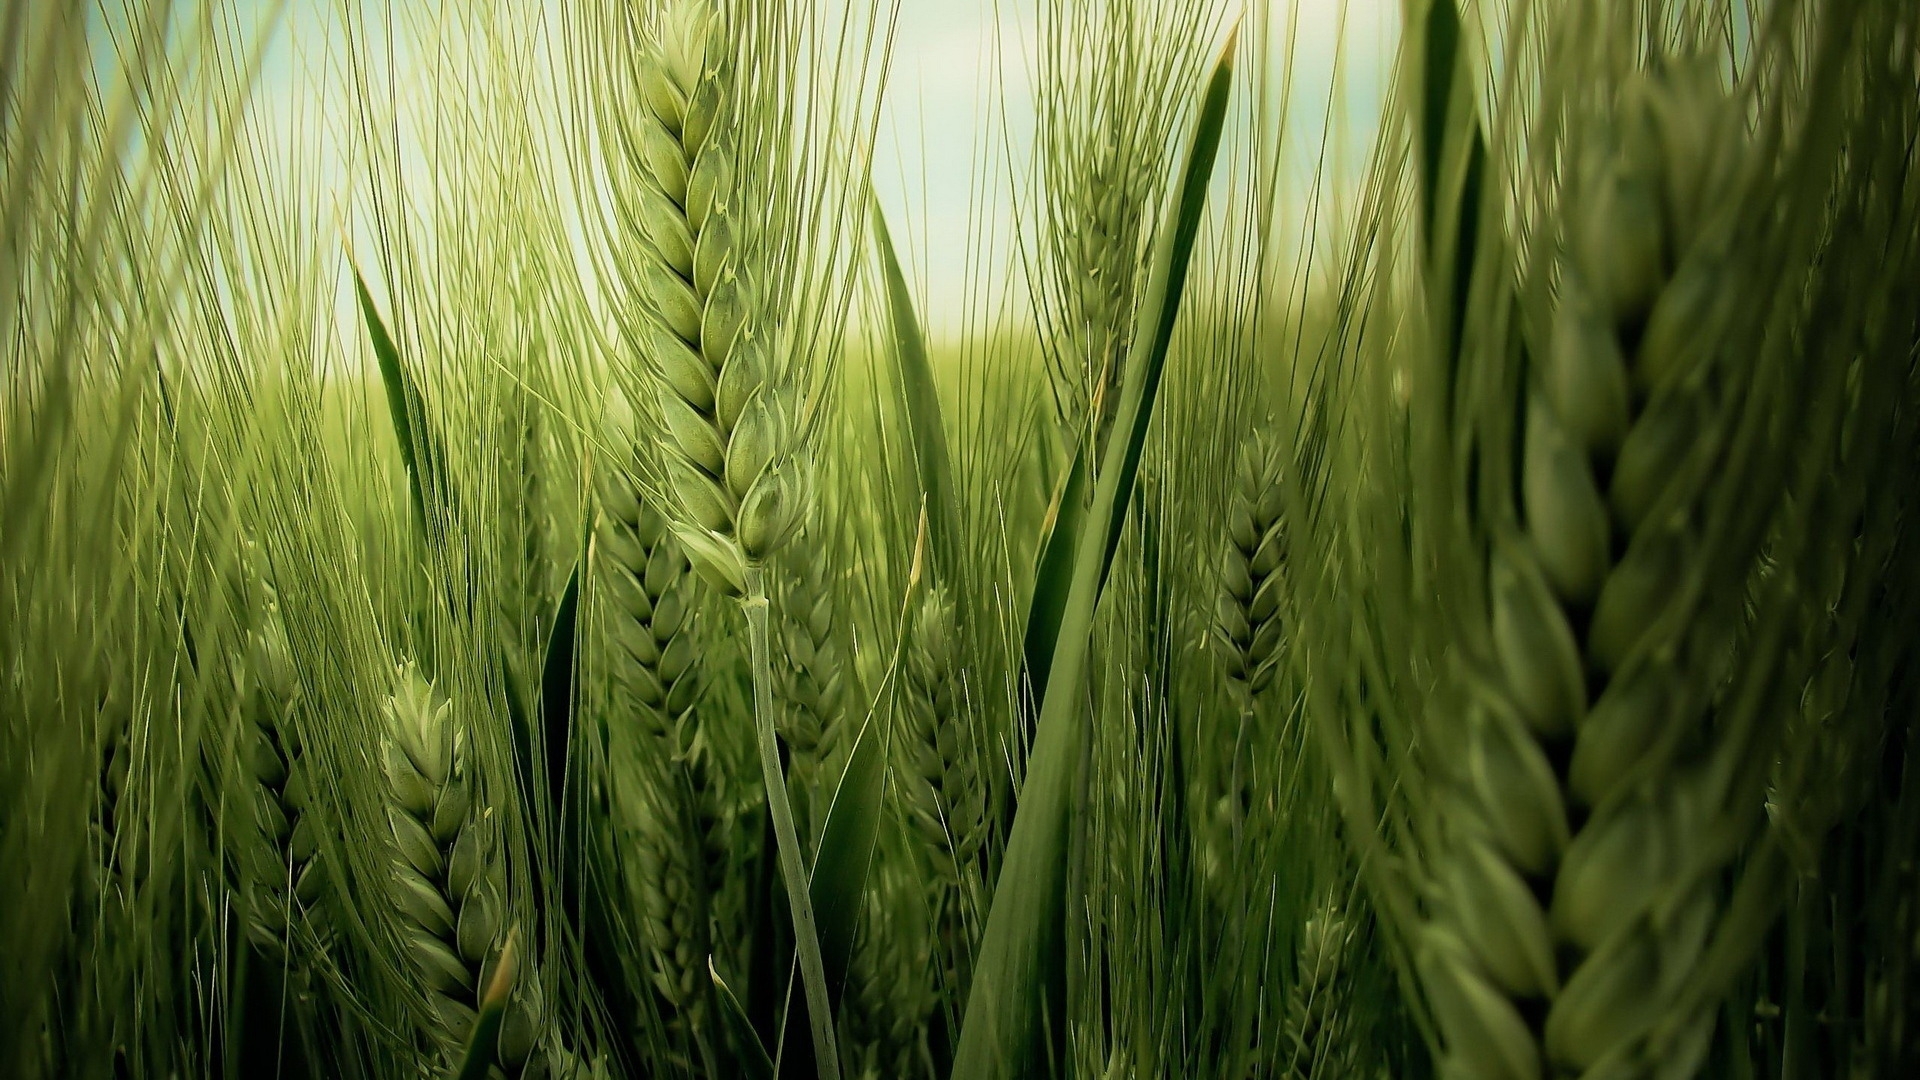 Green Wheat Field for 1920 x 1080 HDTV 1080p resolution